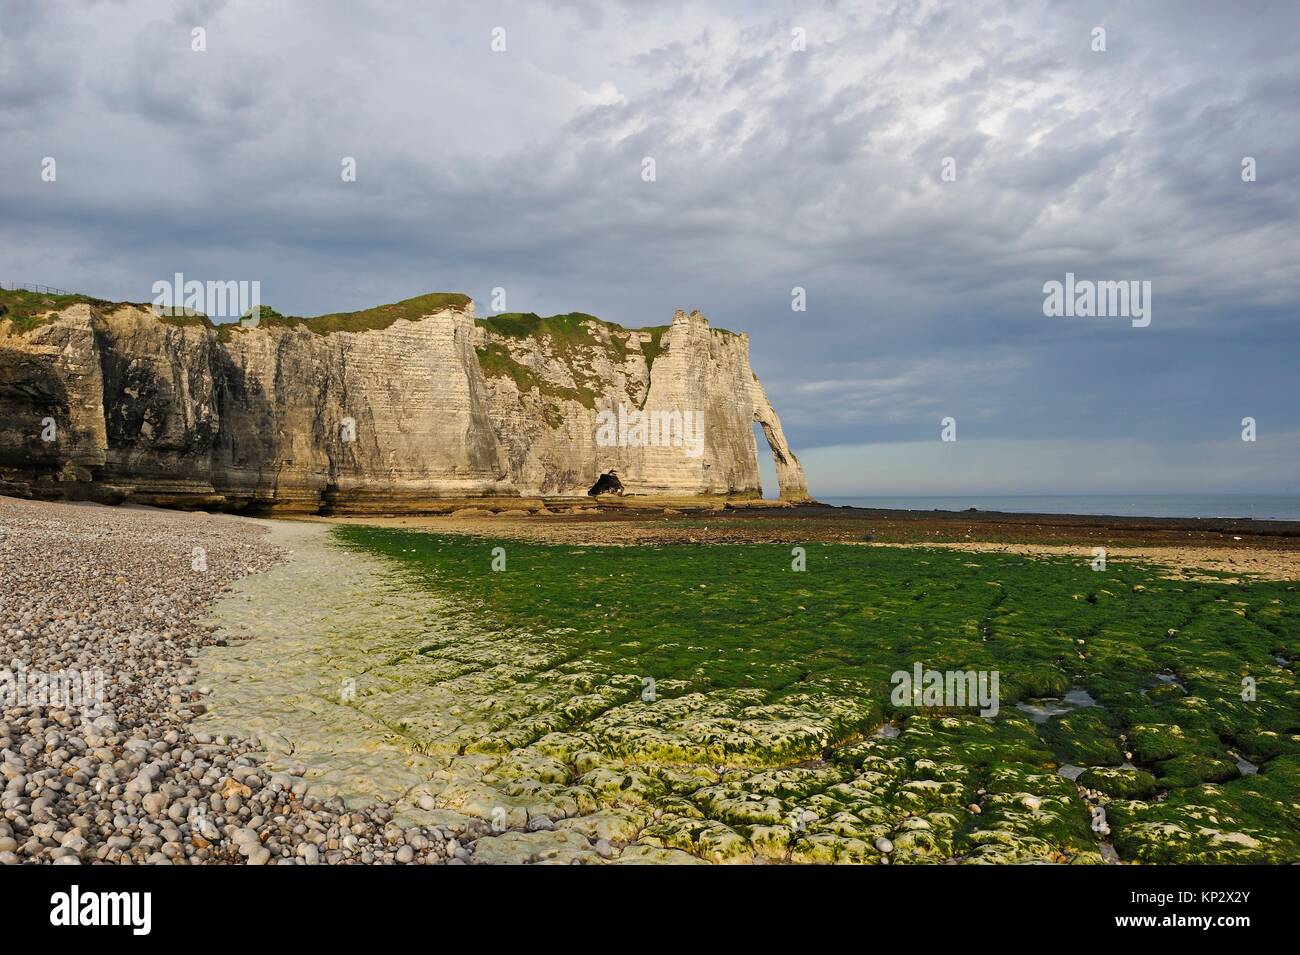 foreshore at low tide and cliff, Etretat, Seine-Maritime department, Normandie region, France, Europe. Stock Photo